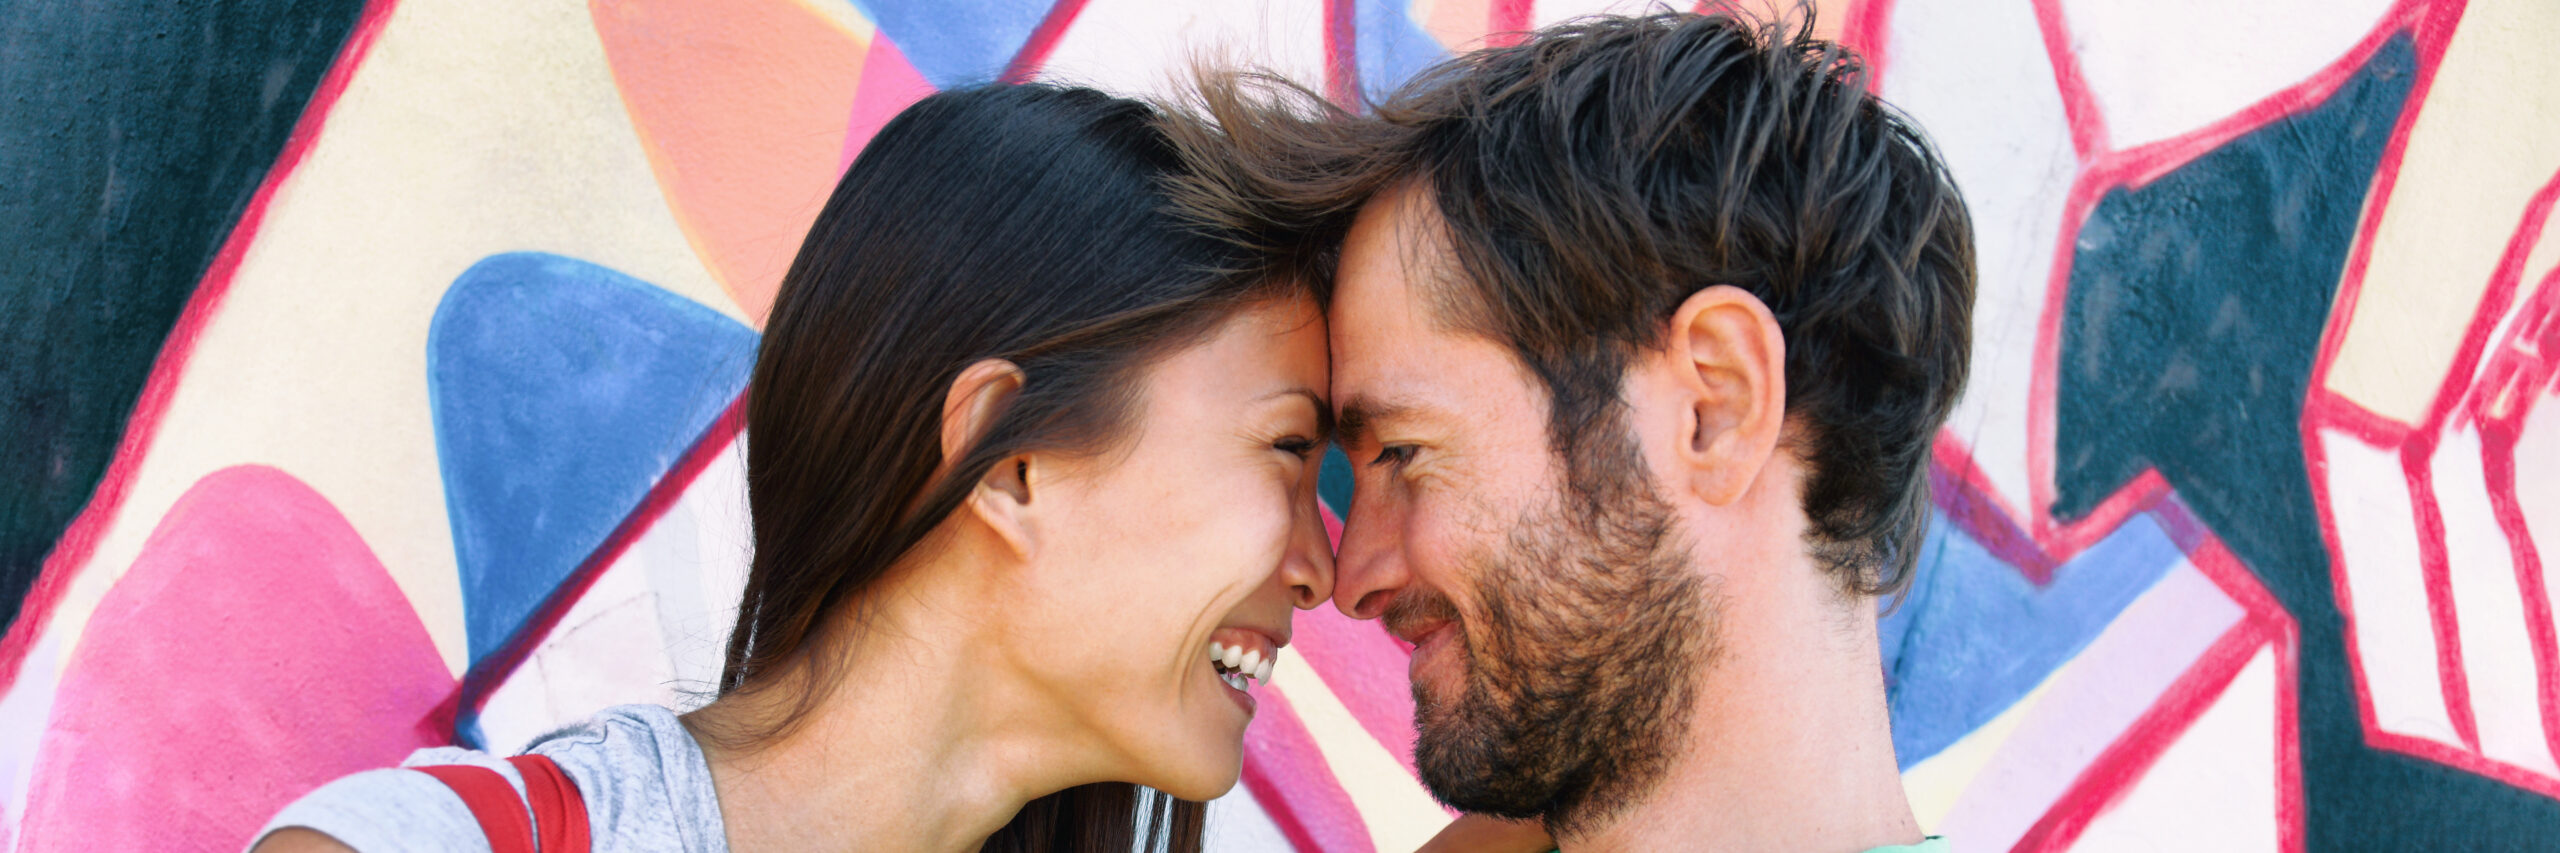 7 Powerful Steps to Attract Your Twin Flame and Ignite Lasting Love